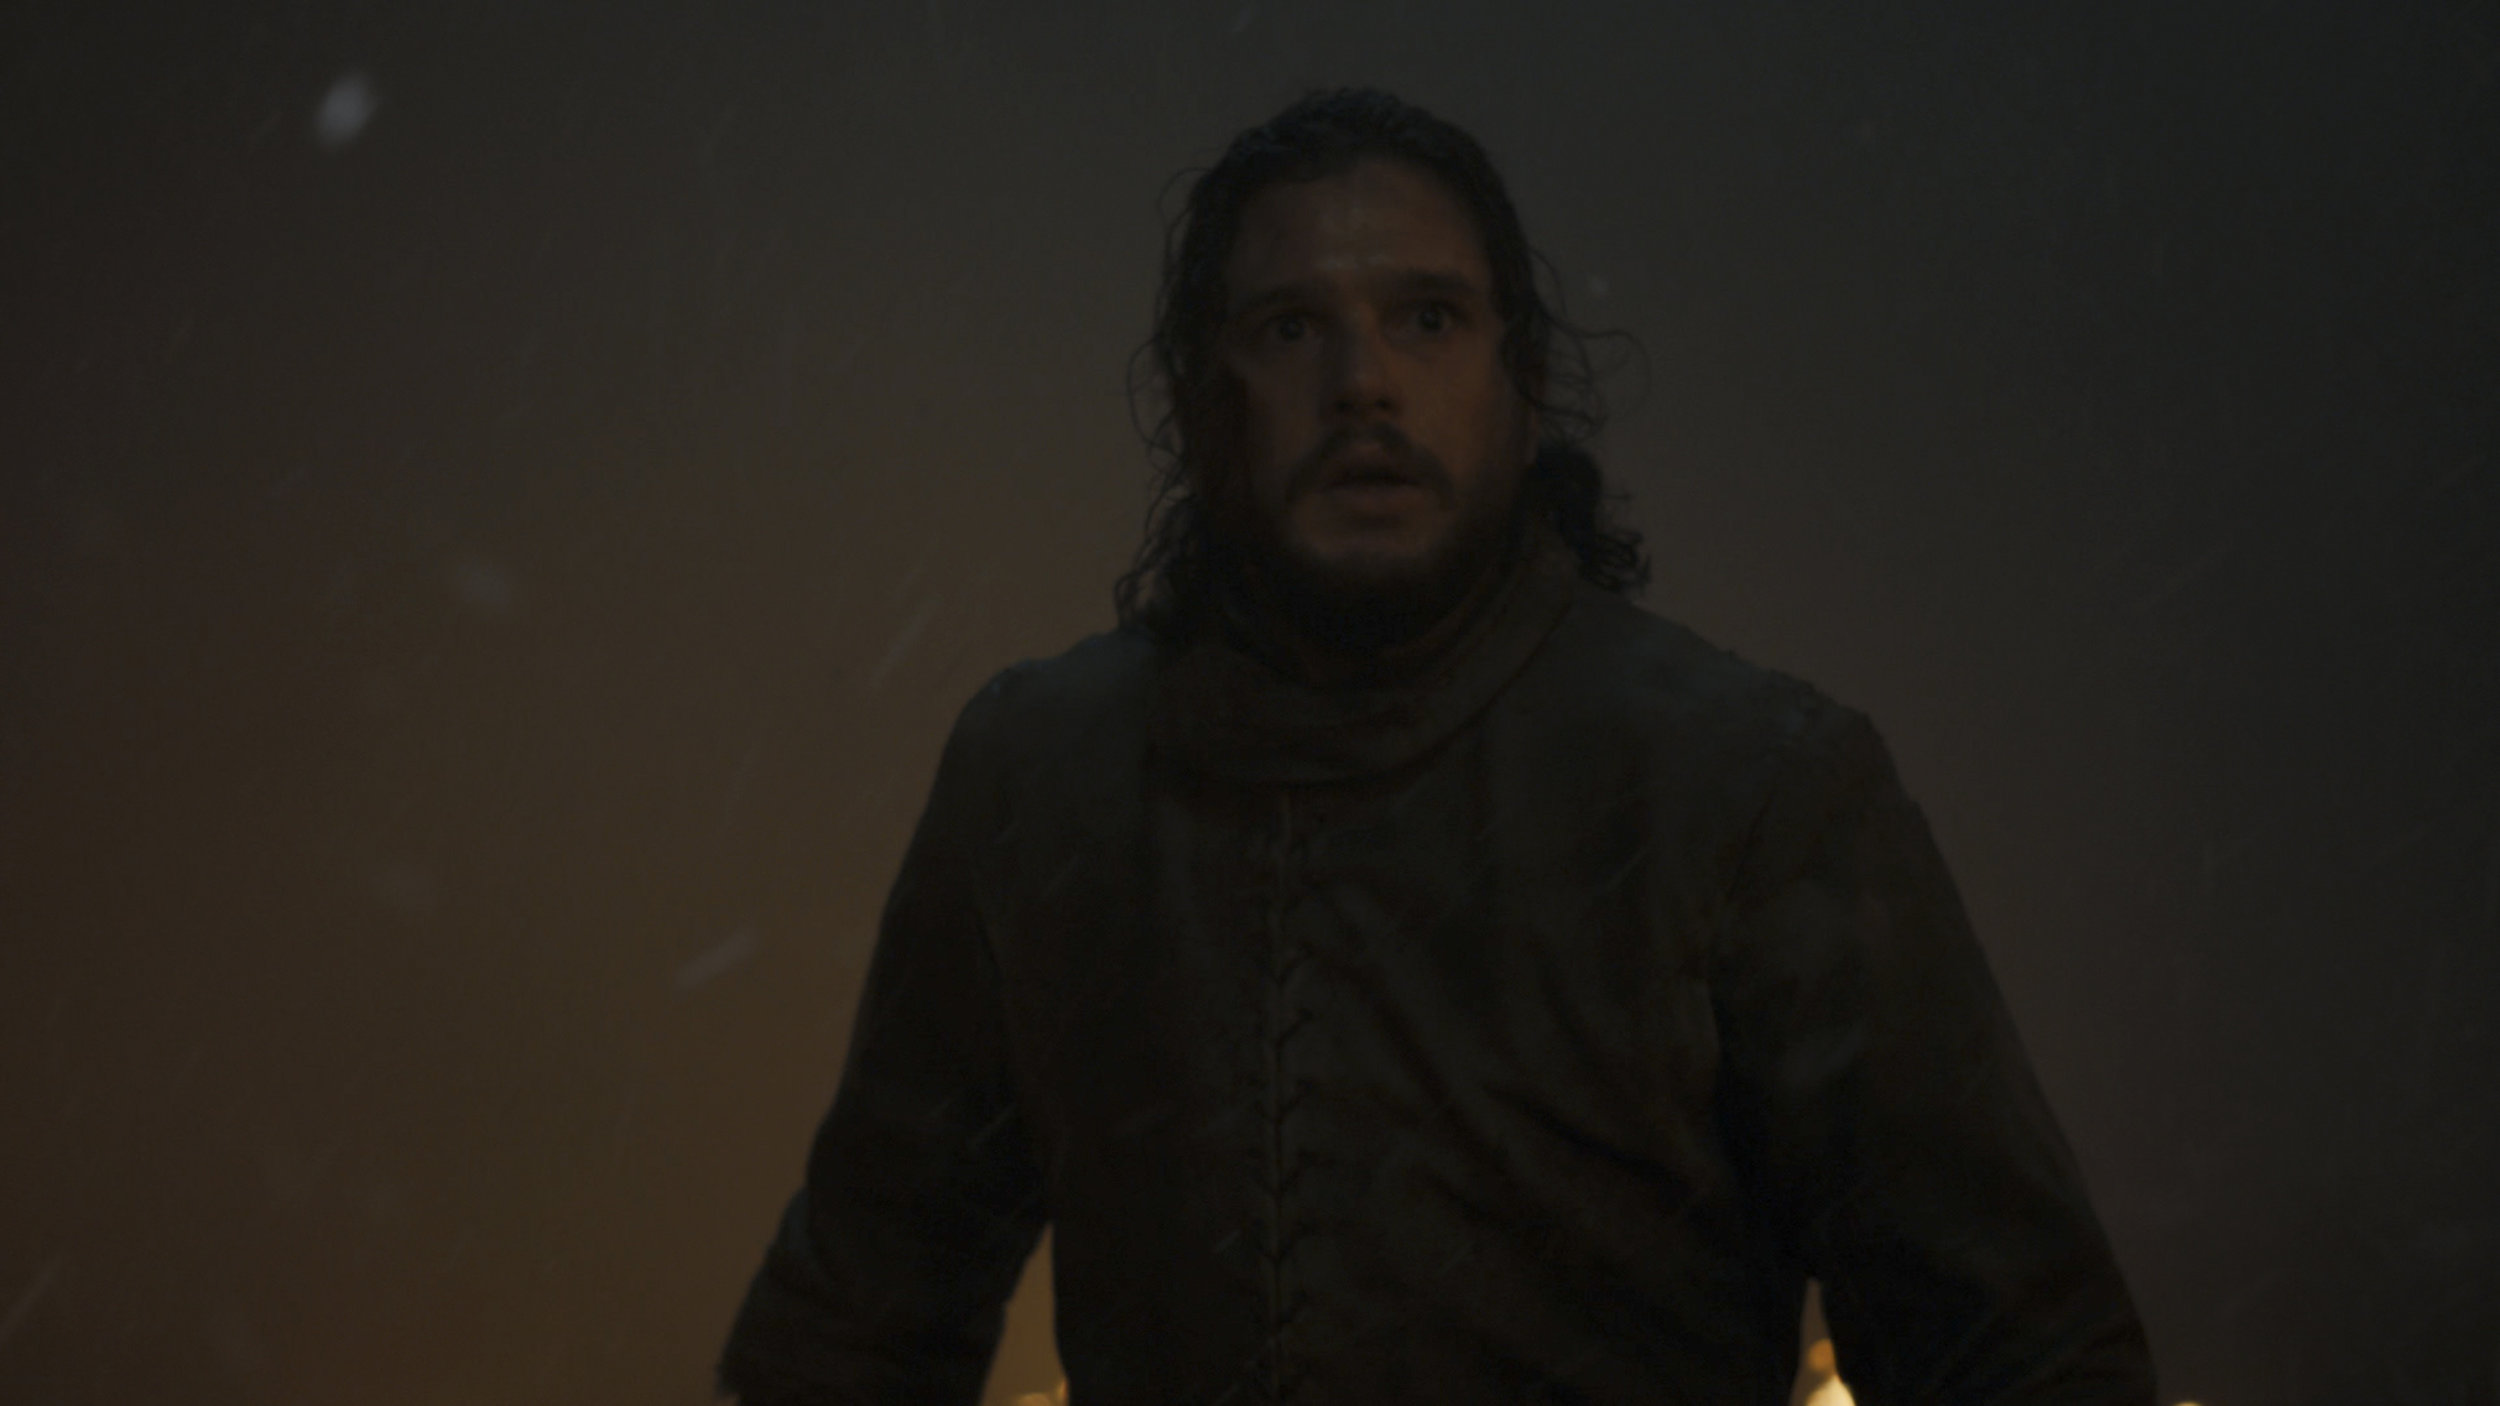   “Oh shit. Oh shit oh shit oh shit oh shit. Shit.”  Image - HBO 